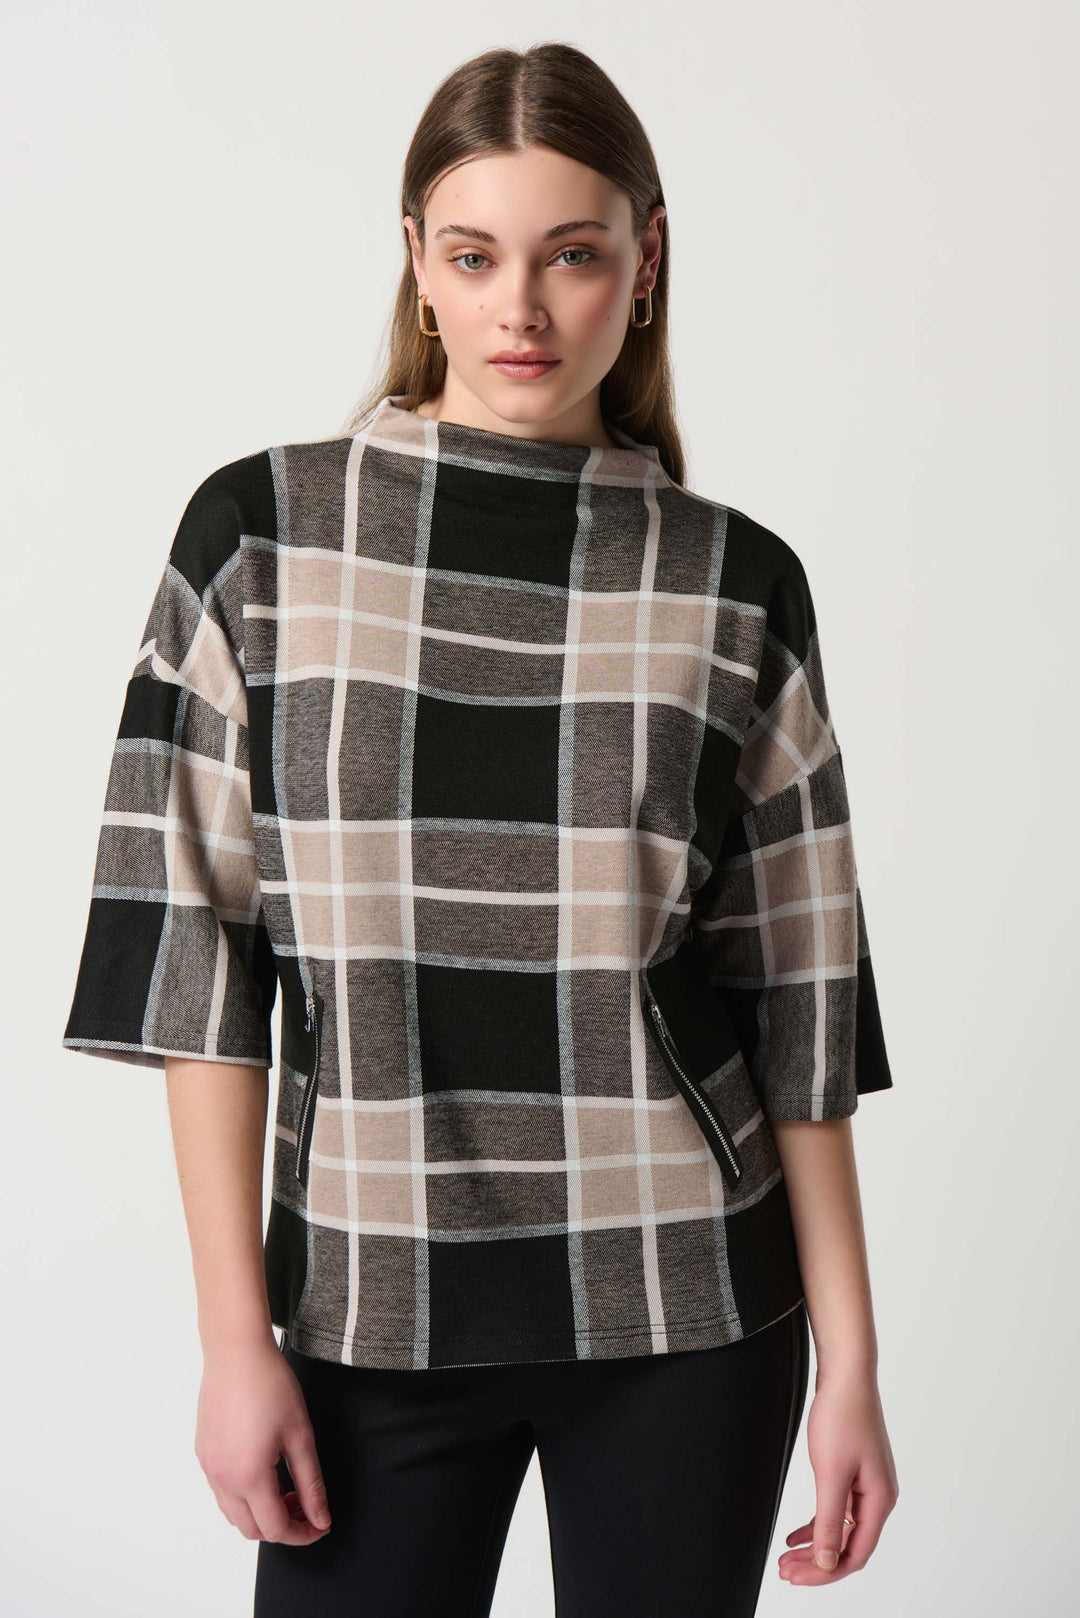 Its trendy knit design features a classic plaid print, a mock neck and a front zipper detail. 